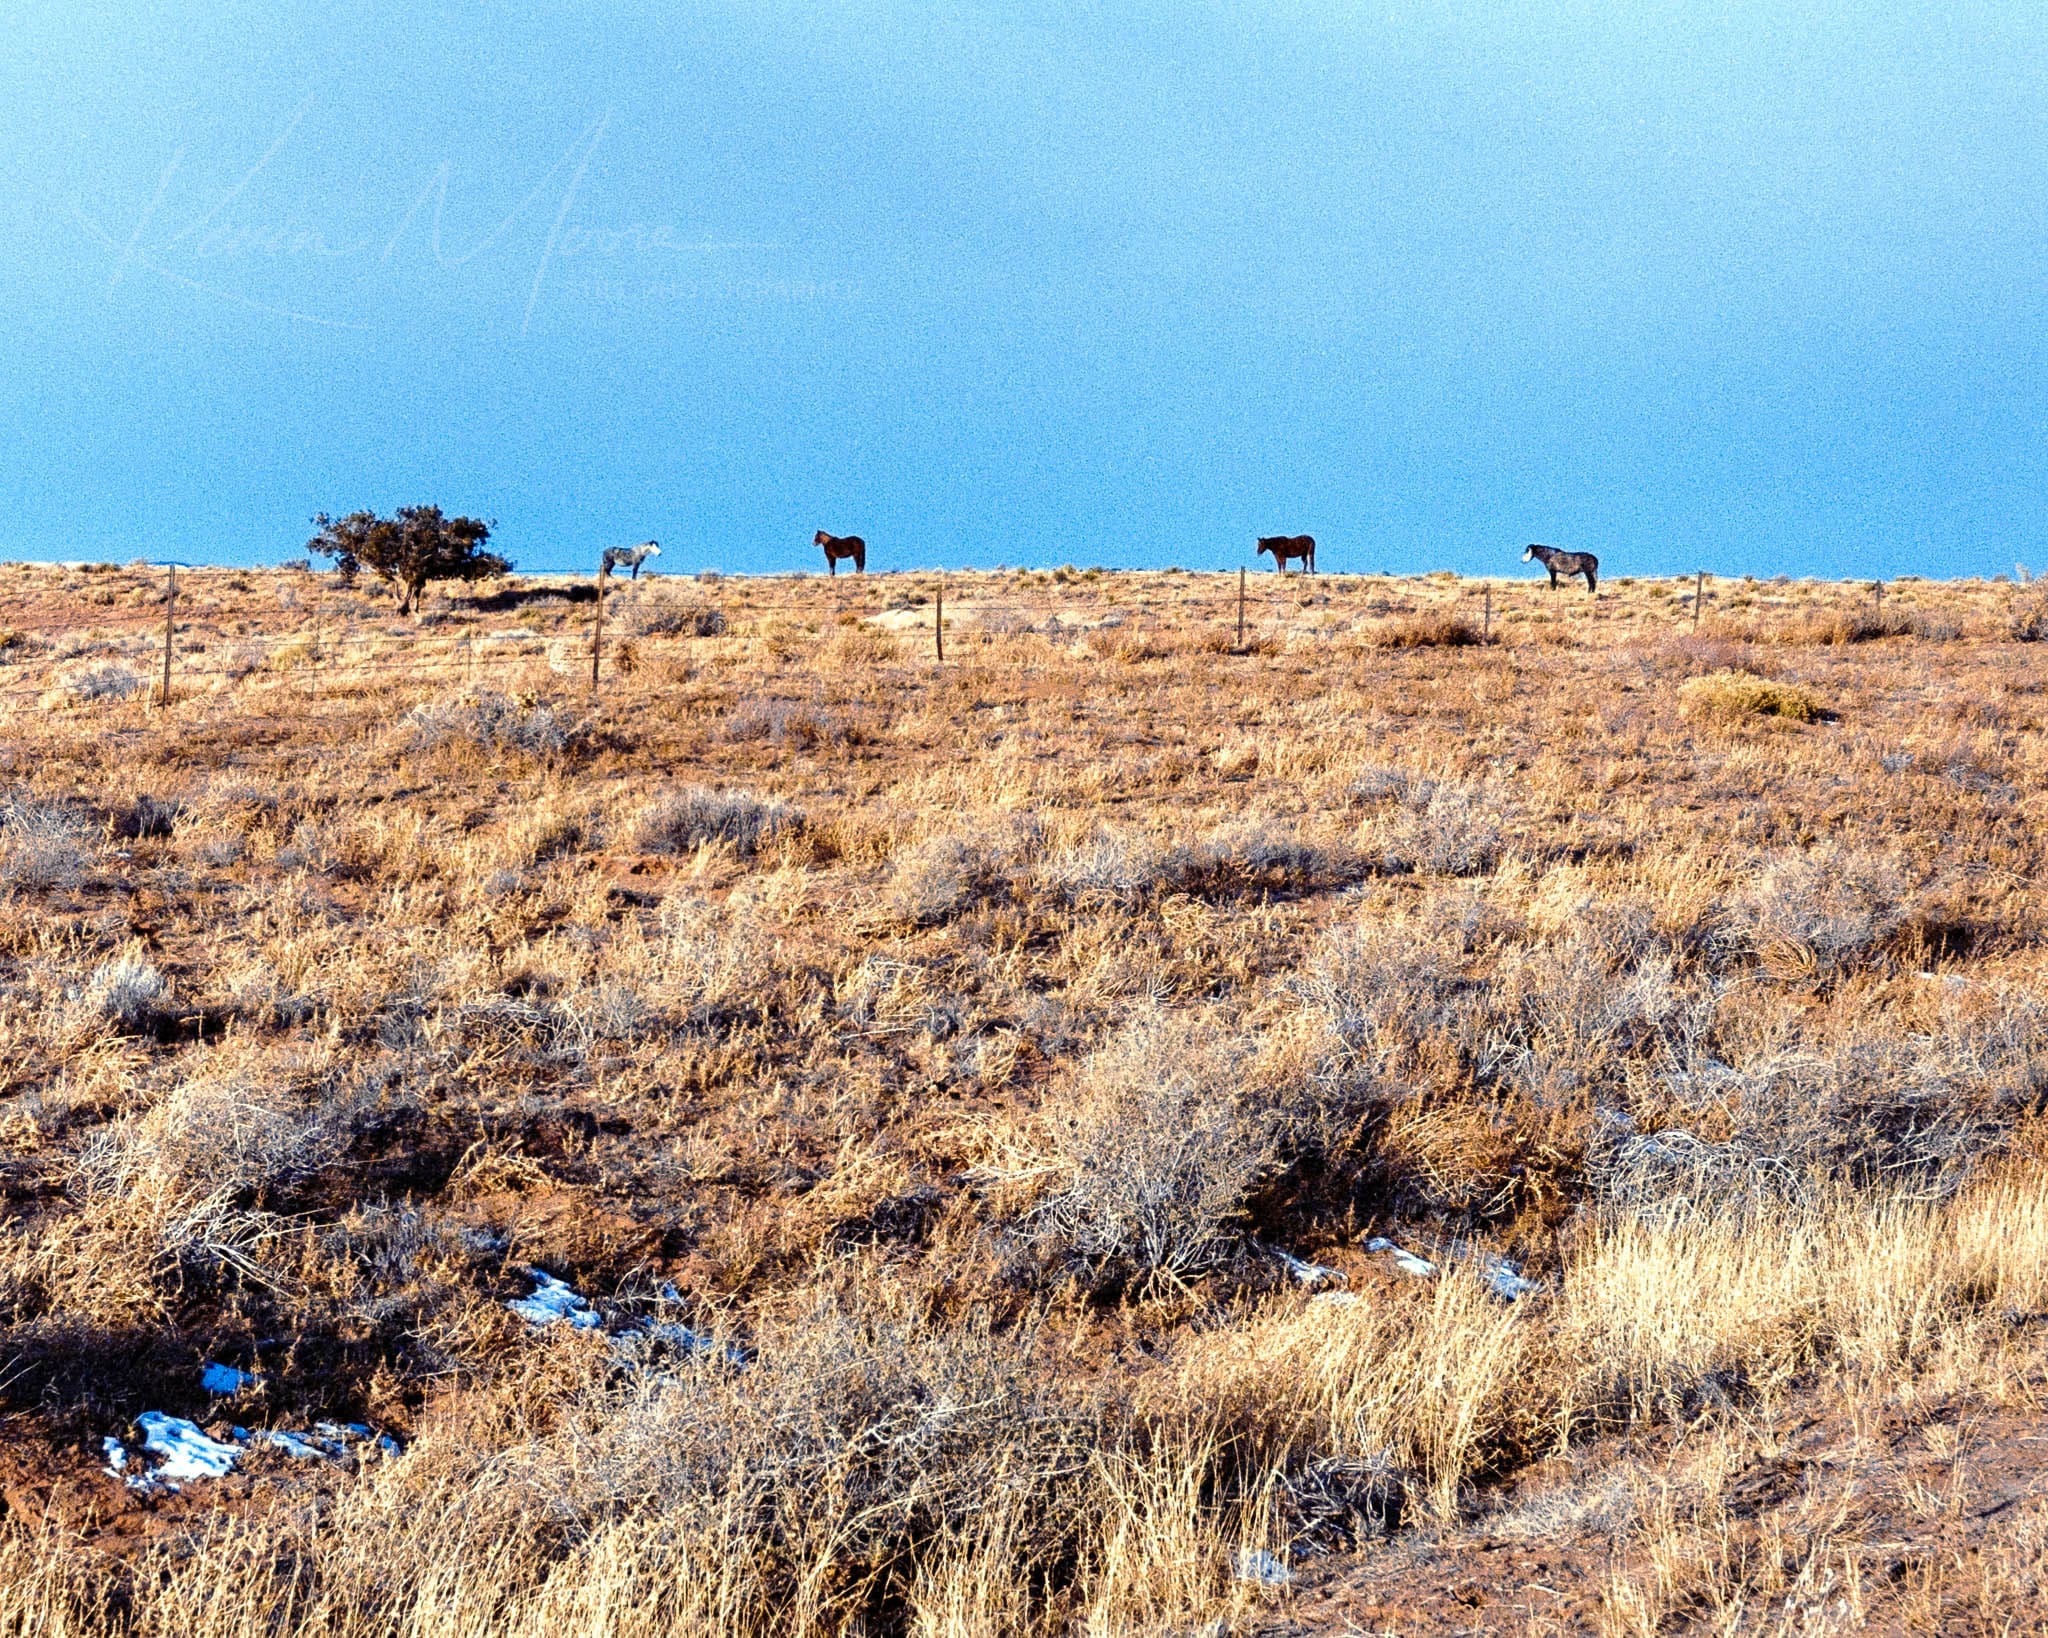 Arid landscape with resilient shrubs and distant wild horses in a semi-desert ecosystem.